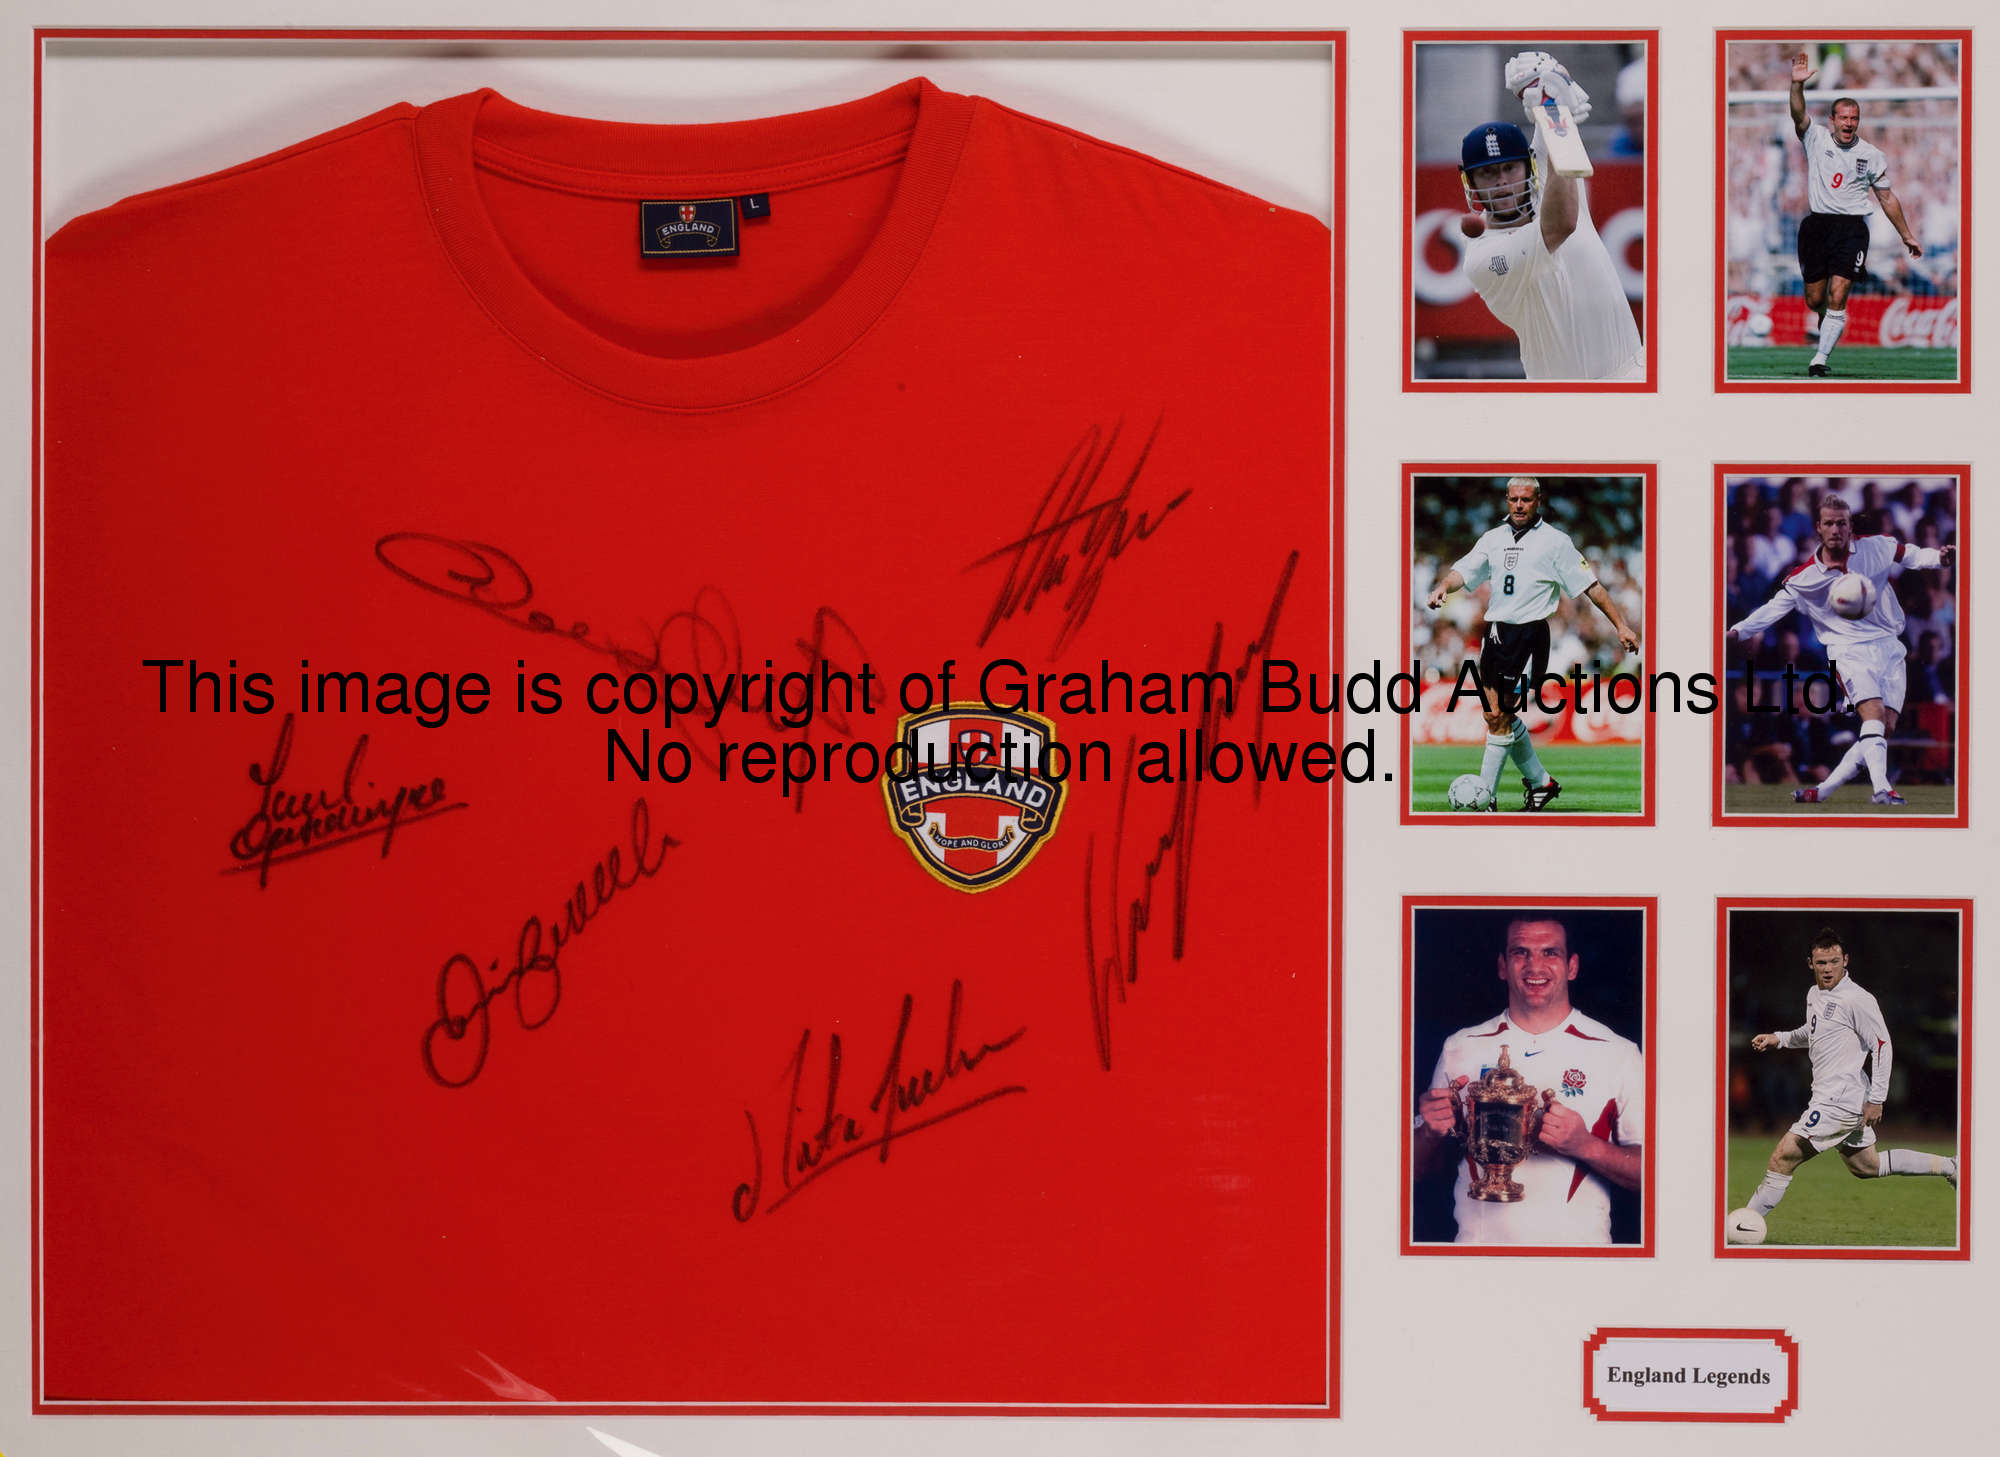 A signed England legends display, mounted ready for framing, comprising a red generic England sporti...